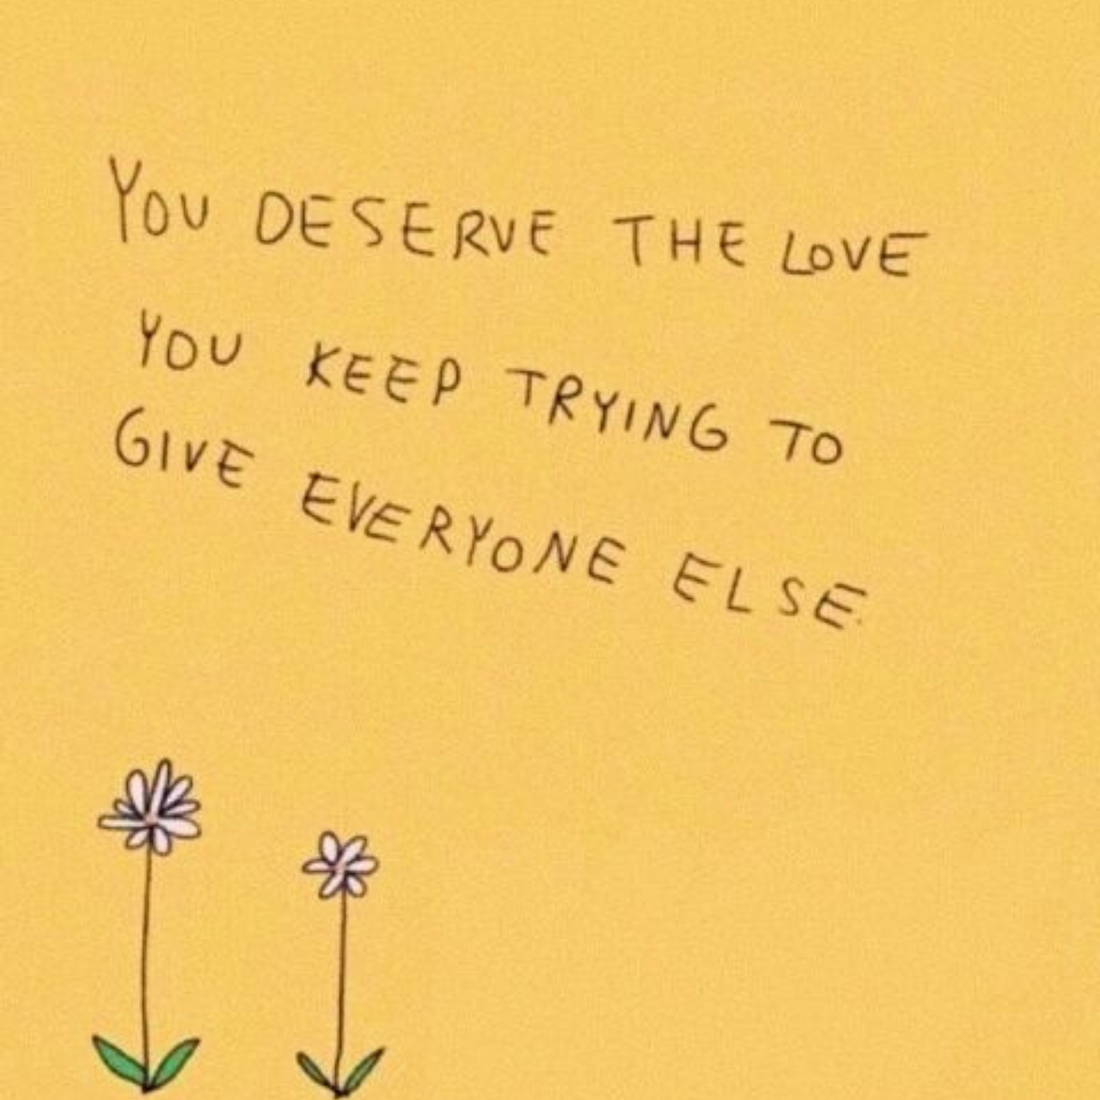 You are deserving 💜